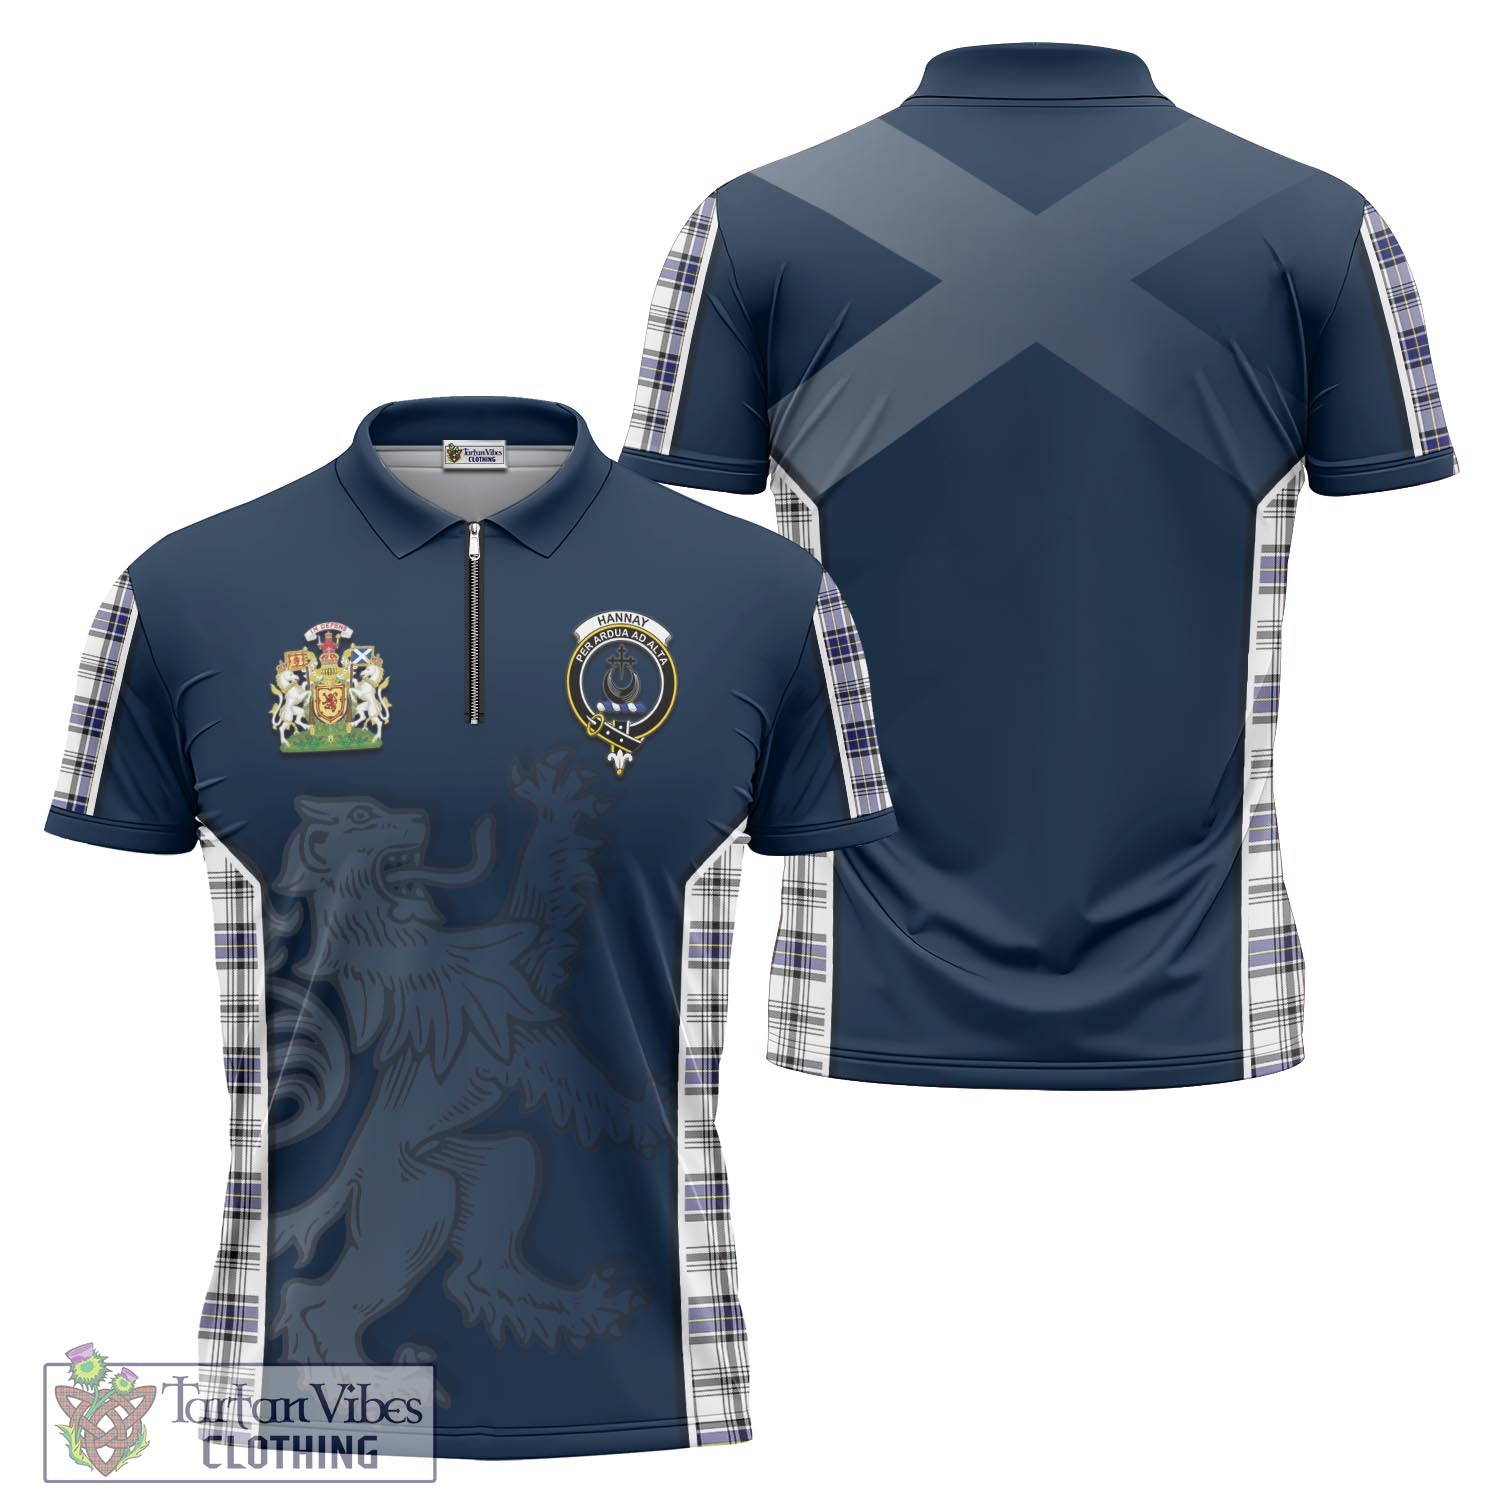 Tartan Vibes Clothing Hannay Modern Tartan Zipper Polo Shirt with Family Crest and Lion Rampant Vibes Sport Style